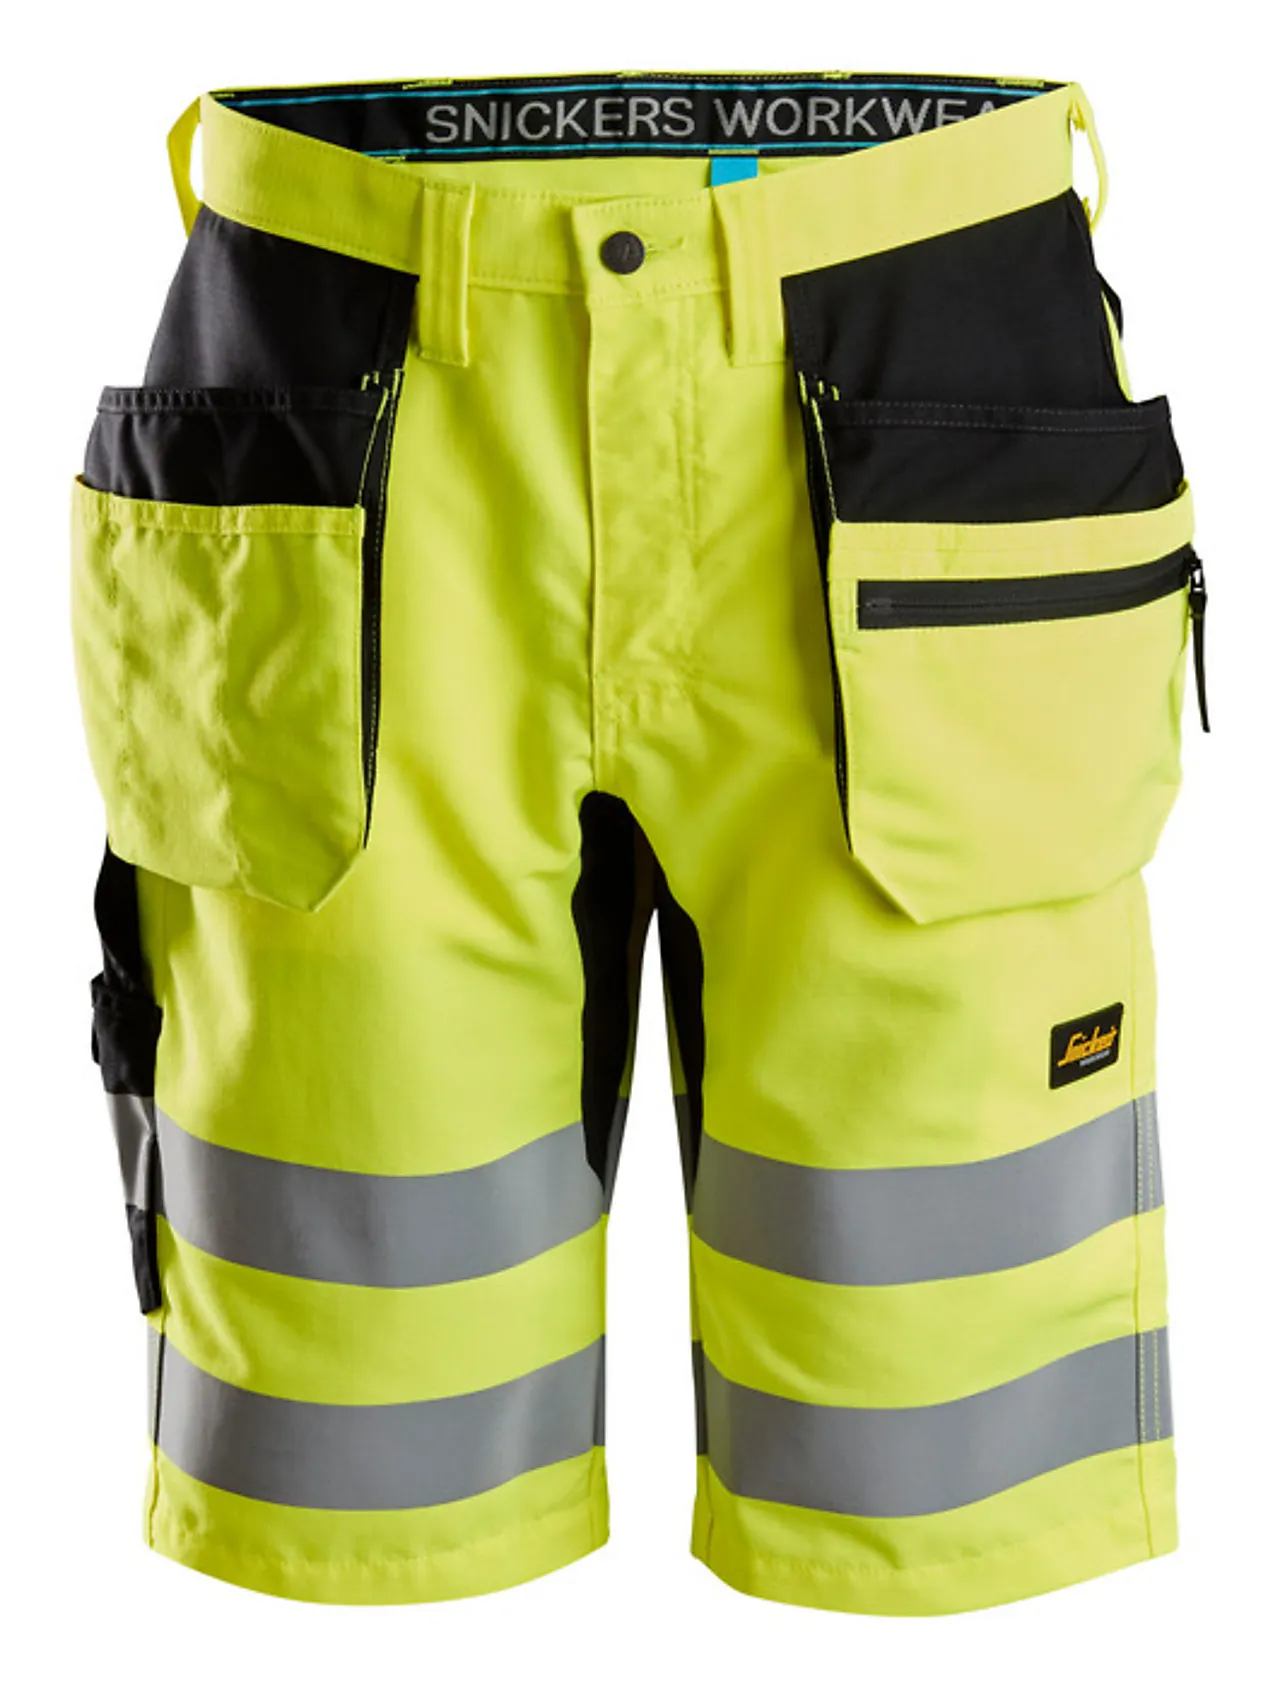 Shorts 6131 hp gul 48 kl1snickers workwear